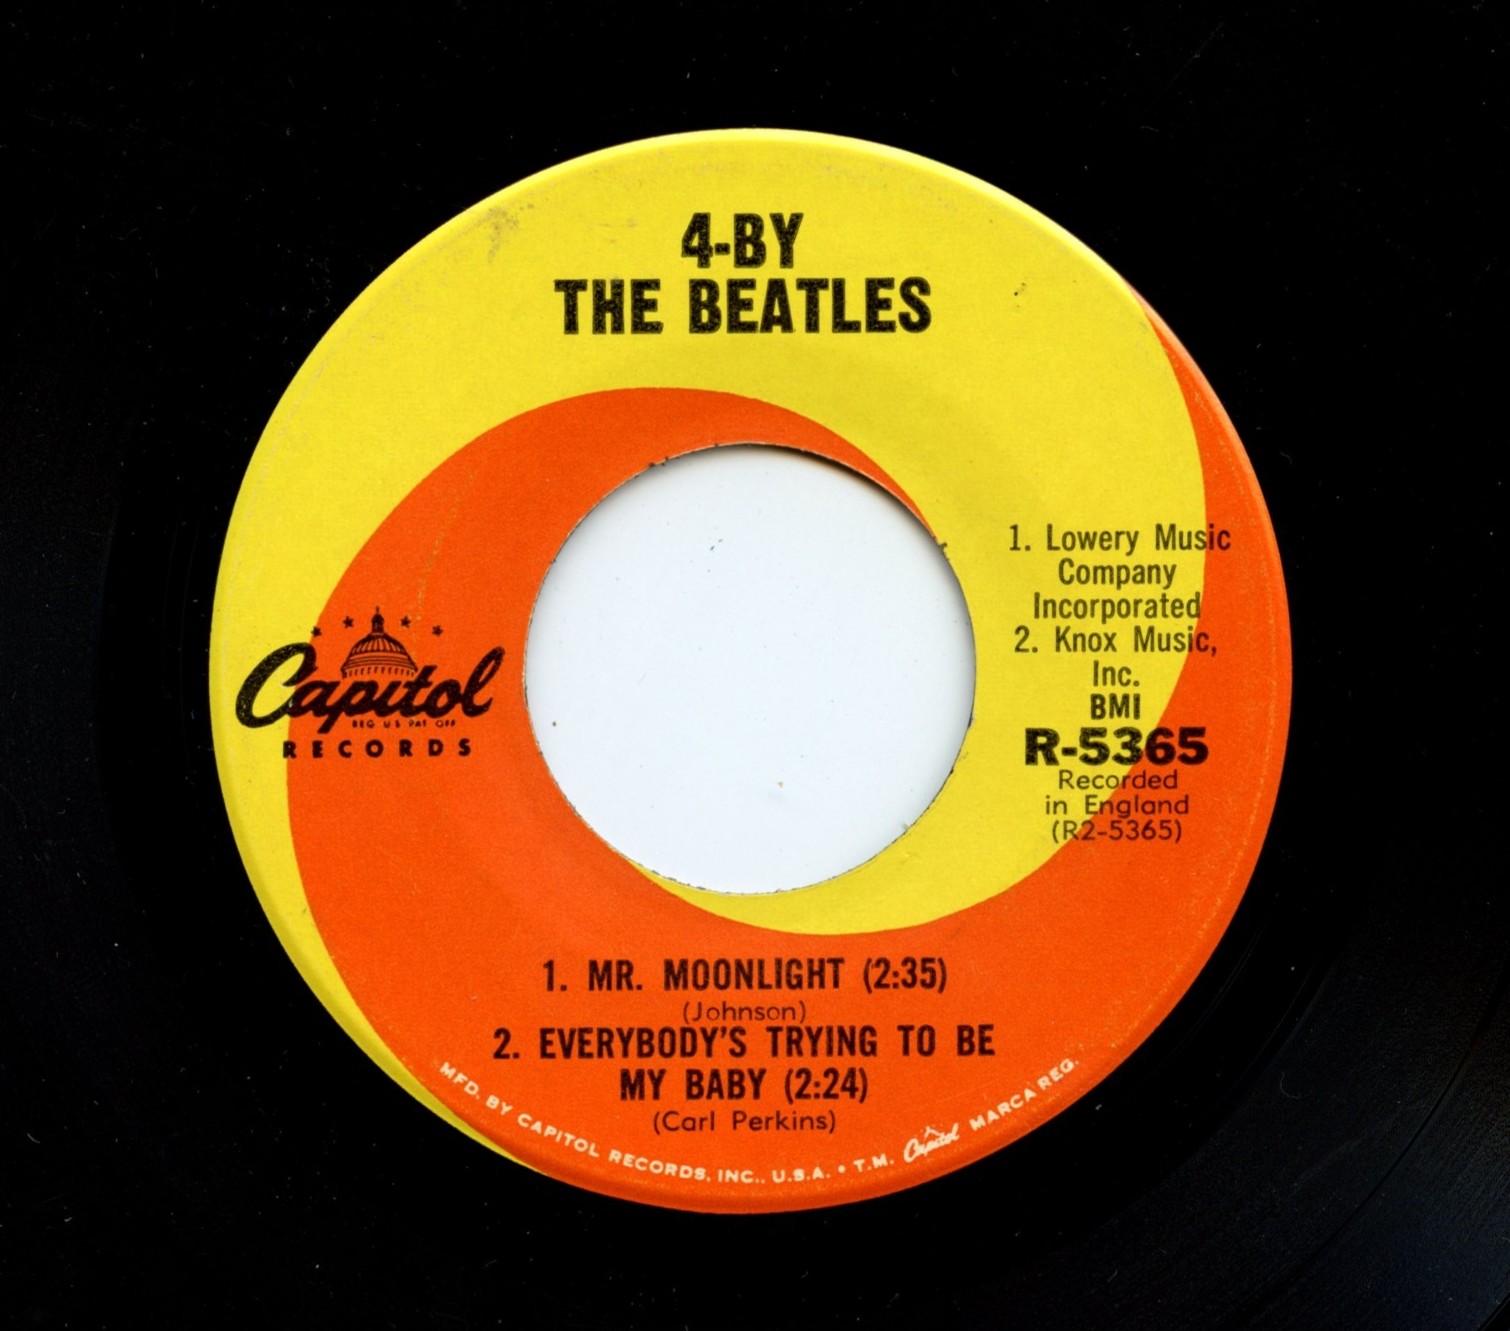 The Beatles ‎Vinyl 4 By 4 / 4 - By The Beatles 1965